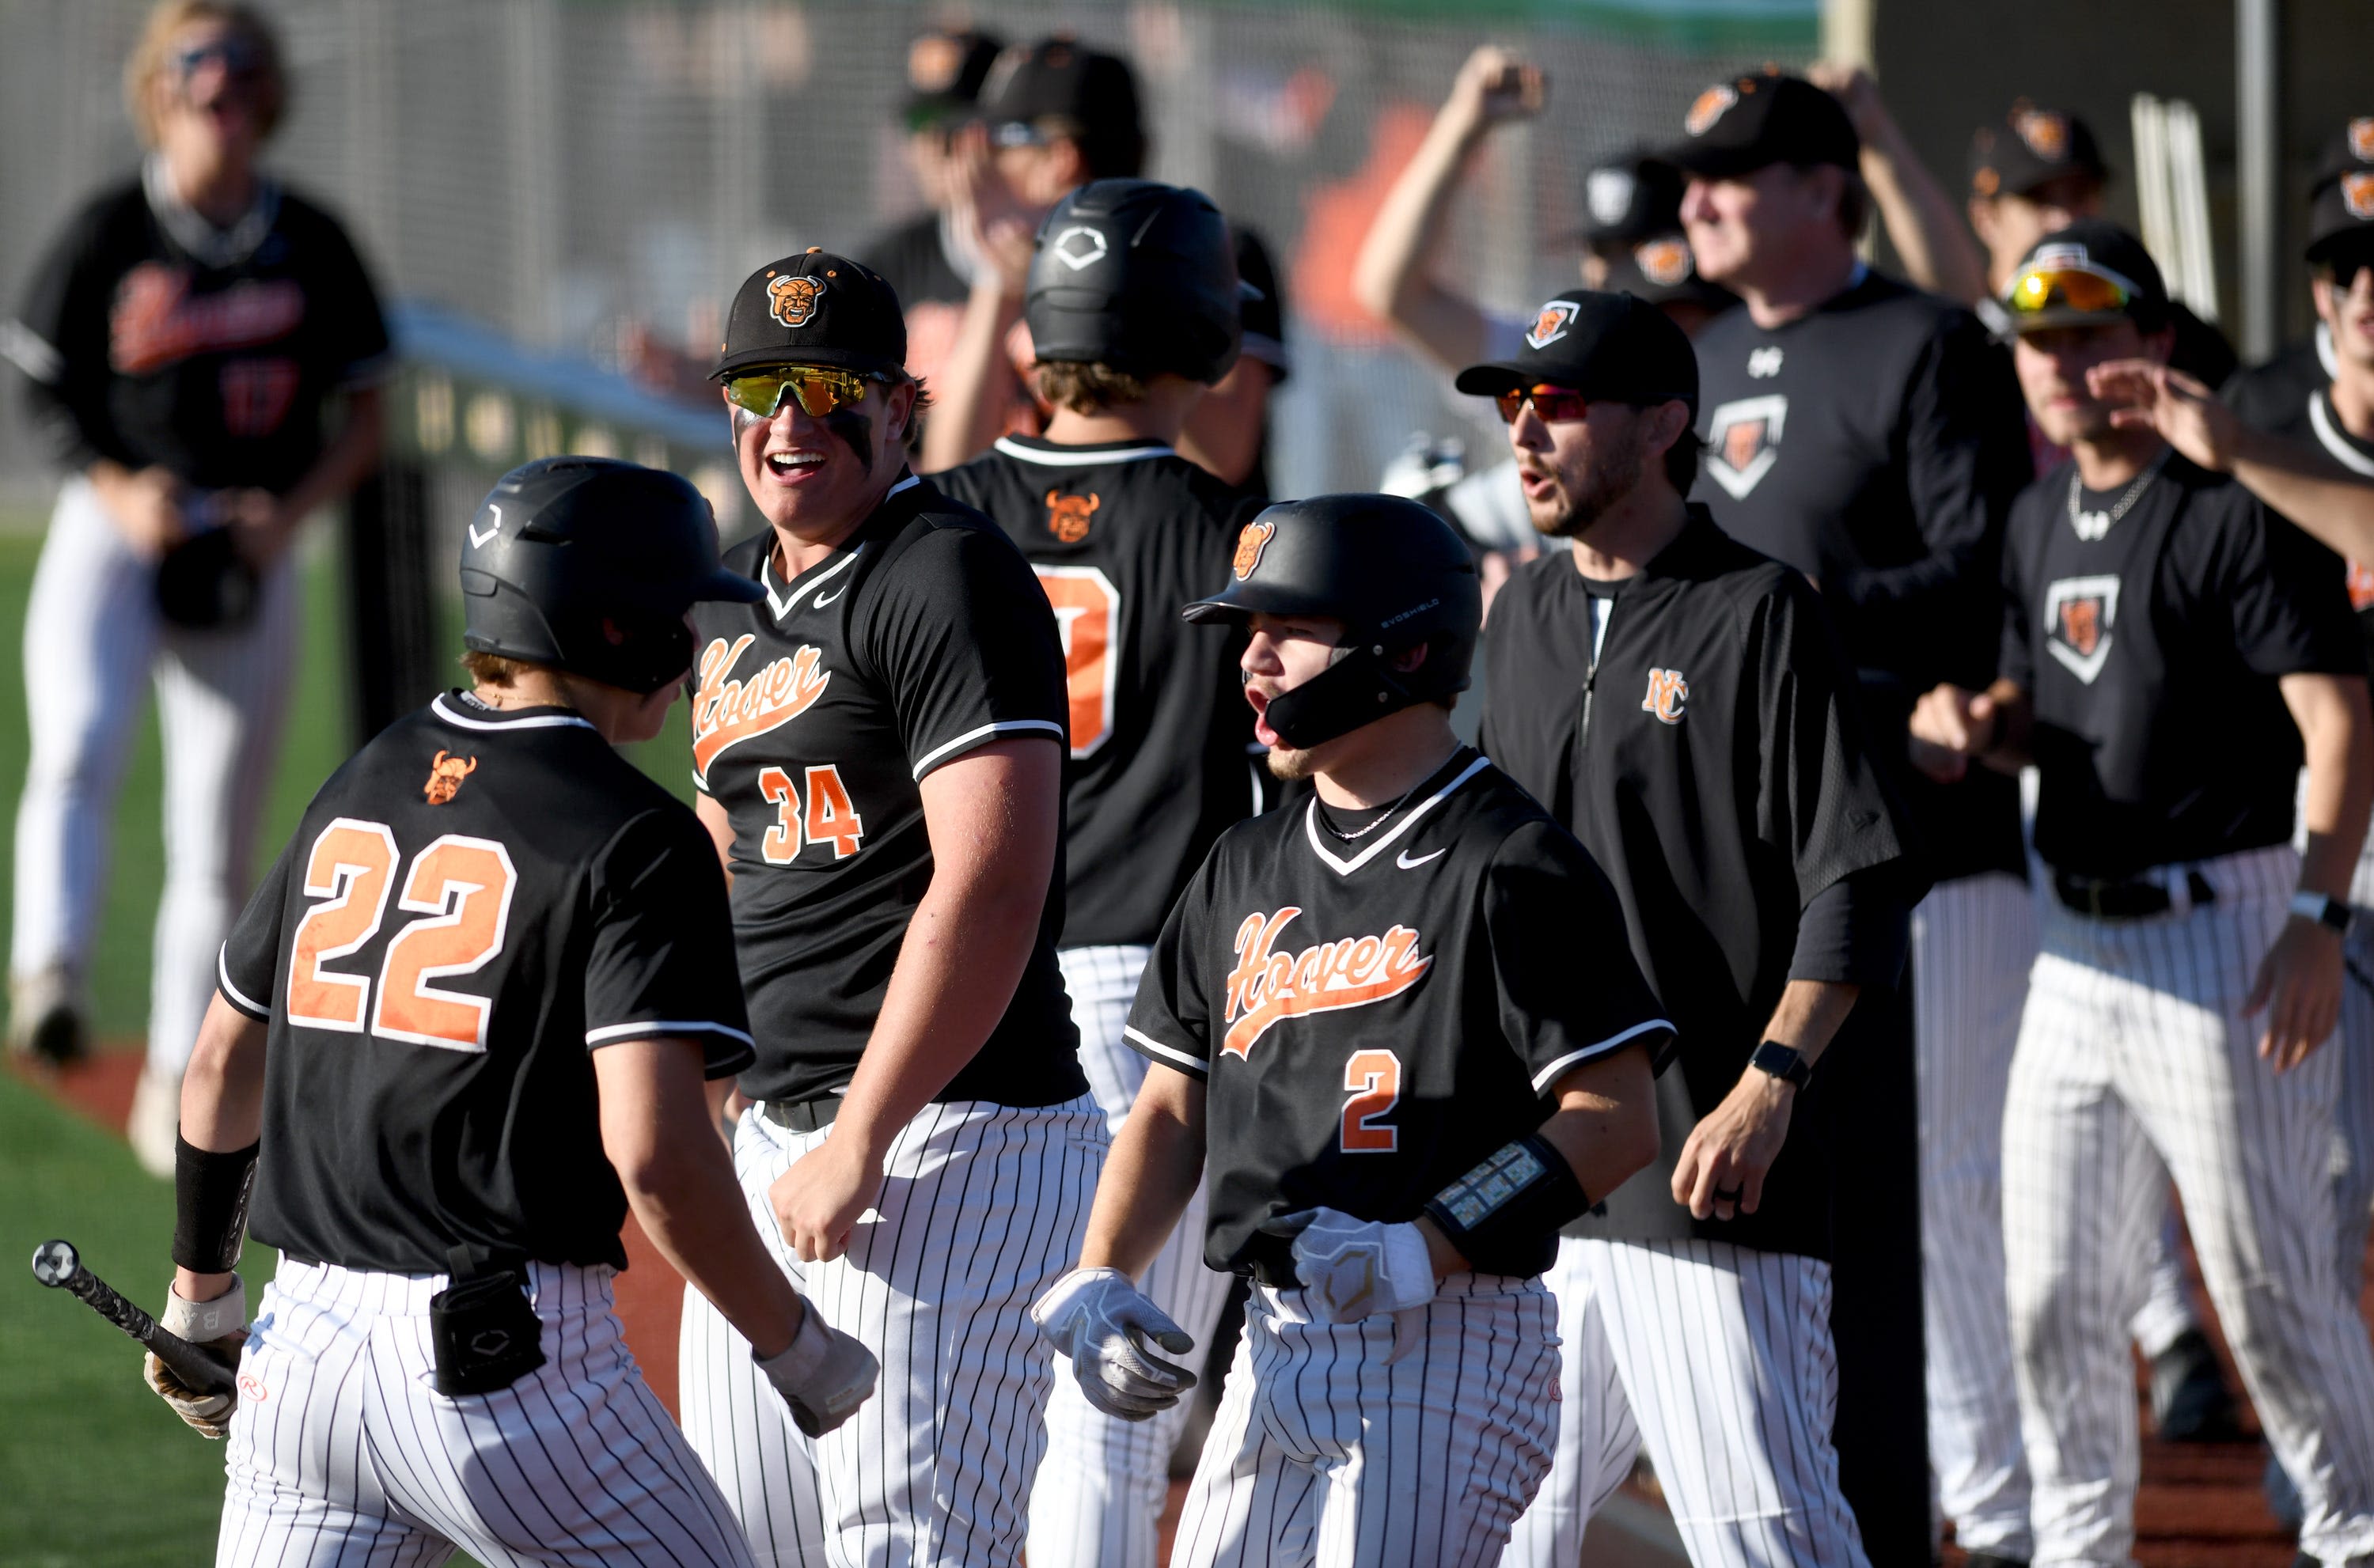 'A fight in these kids': Hoover baseball downs rival Jackson in OHSAA regional semifinal